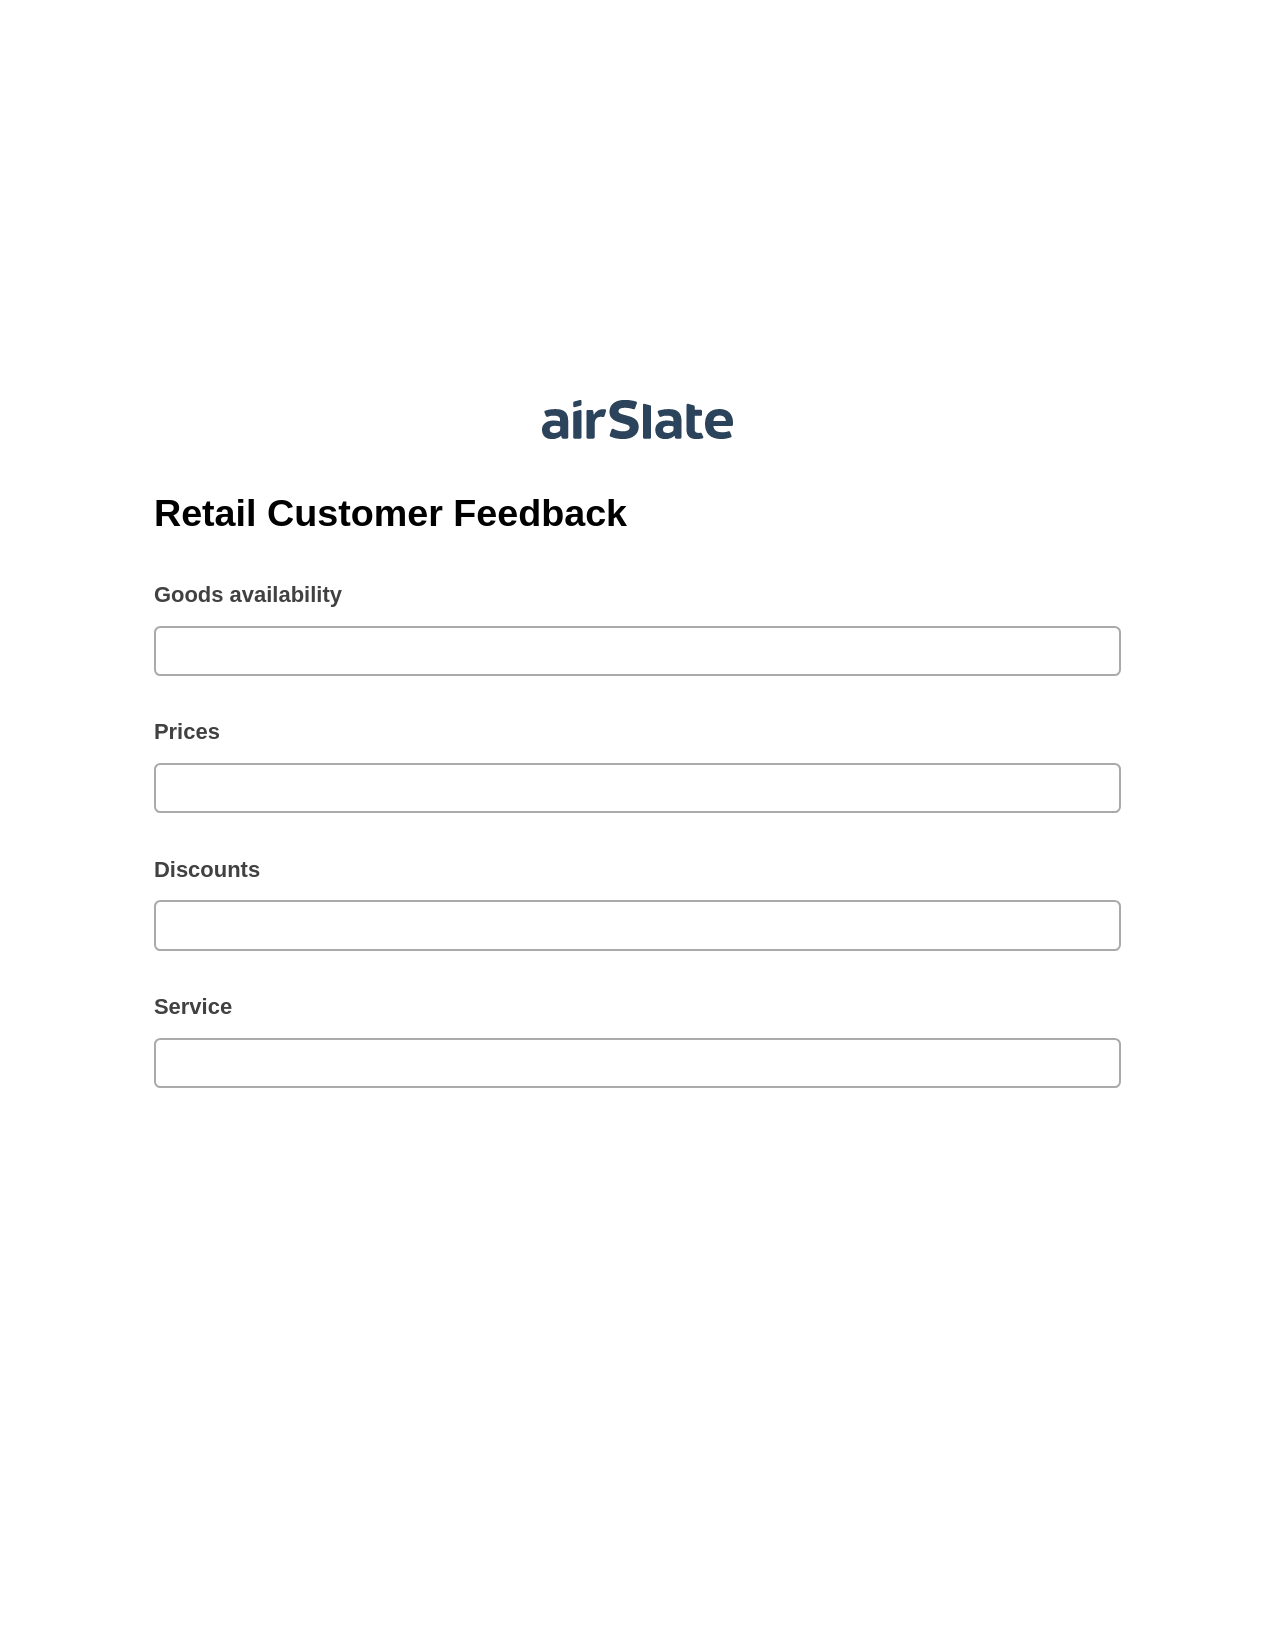 Retail Customer Feedback Pre-fill Slate from MS Dynamics 365 Records Bot, Send Mailchimp Campaign Bot, Email Notification Postfinish Bot